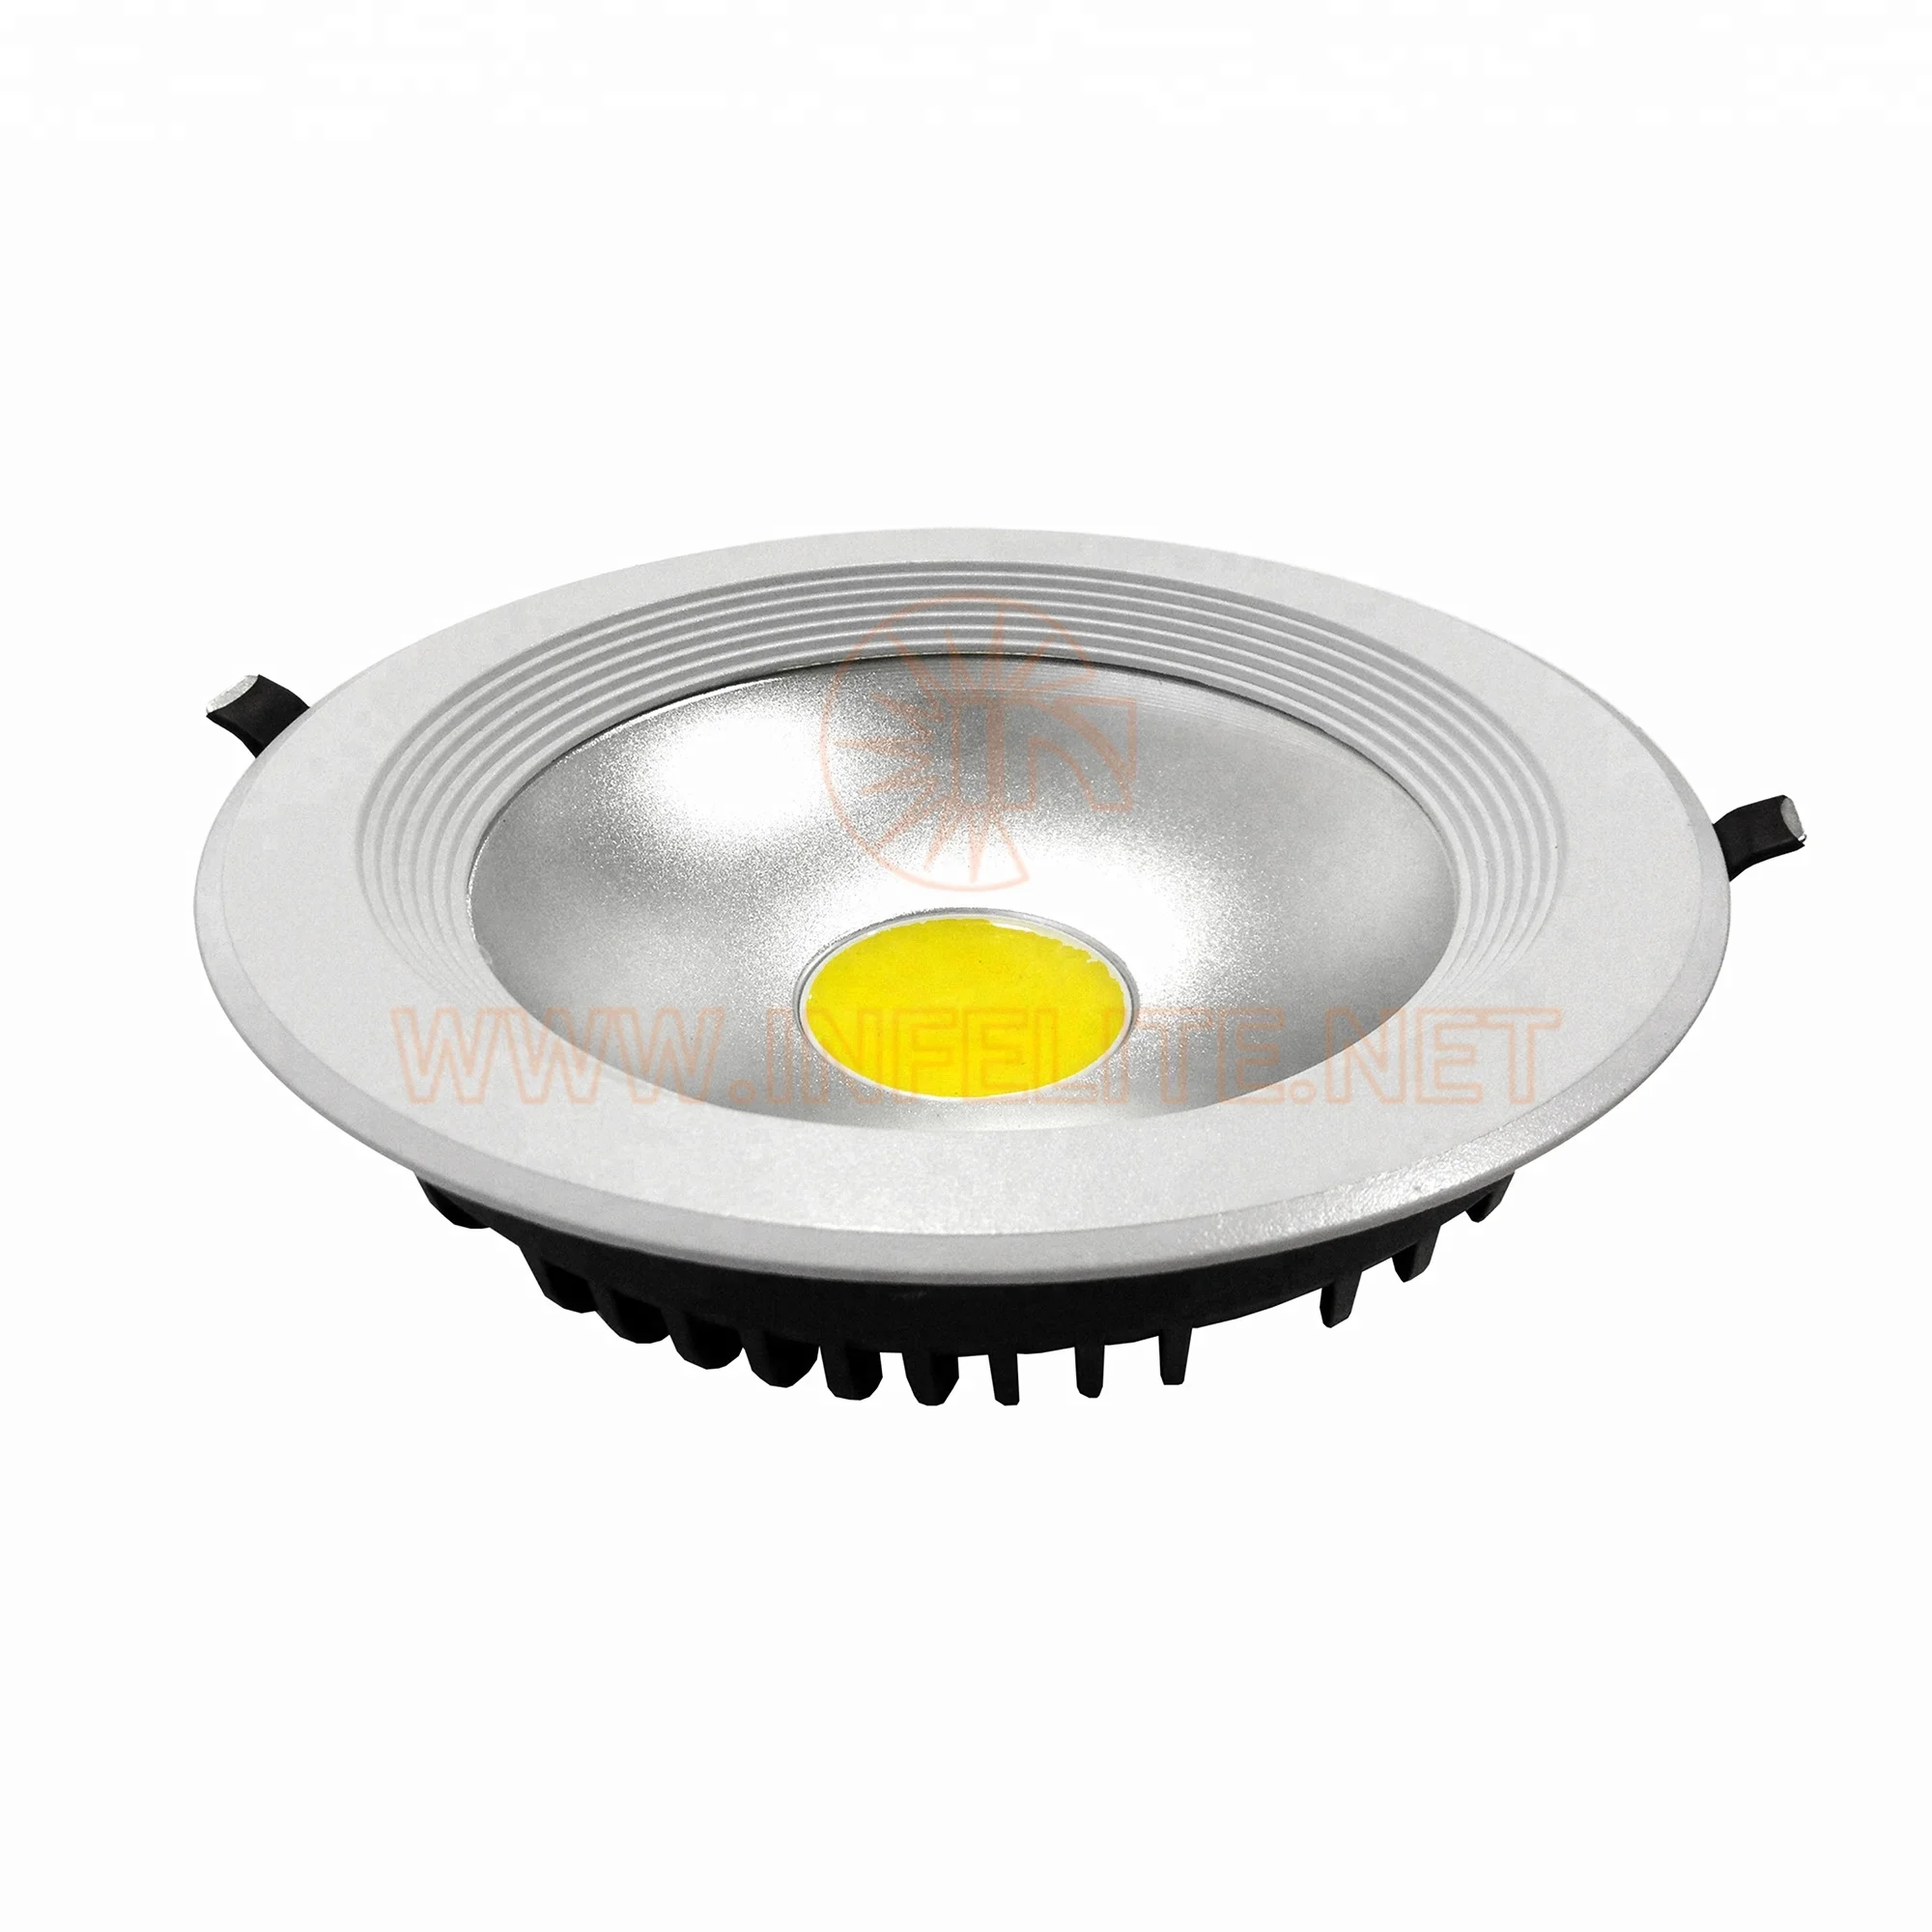 IN-DL105 Super Thin Home Supermarket Indoor Commercial Lighting 5W 7W 10W 15W 20W 30W COB LED Ceiling Downlight Down Light